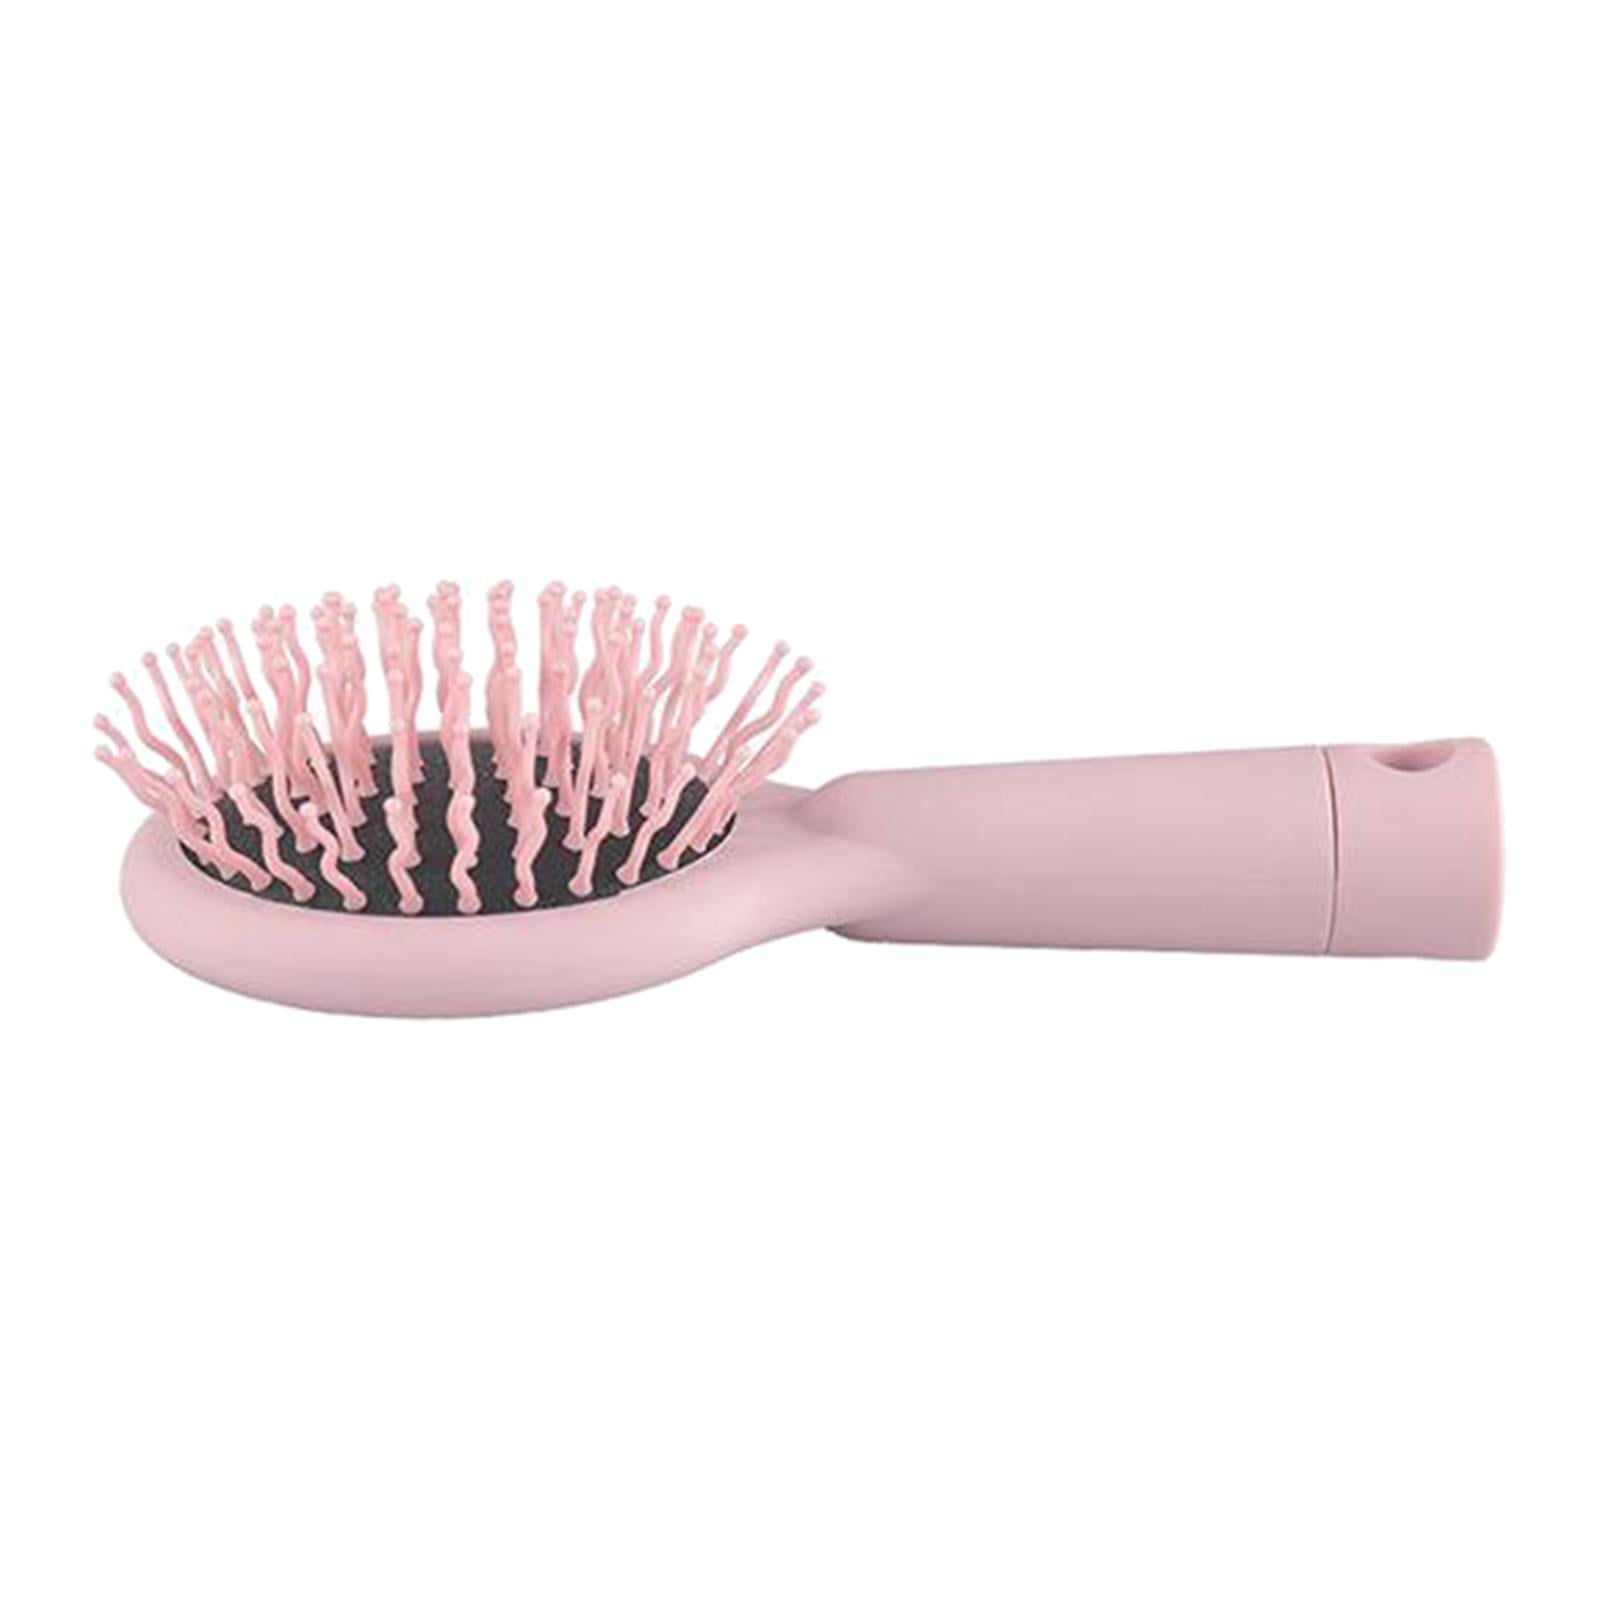 Hair Brush with Mirror, Comb with the back, 2 in 1 Detangler Combs ...